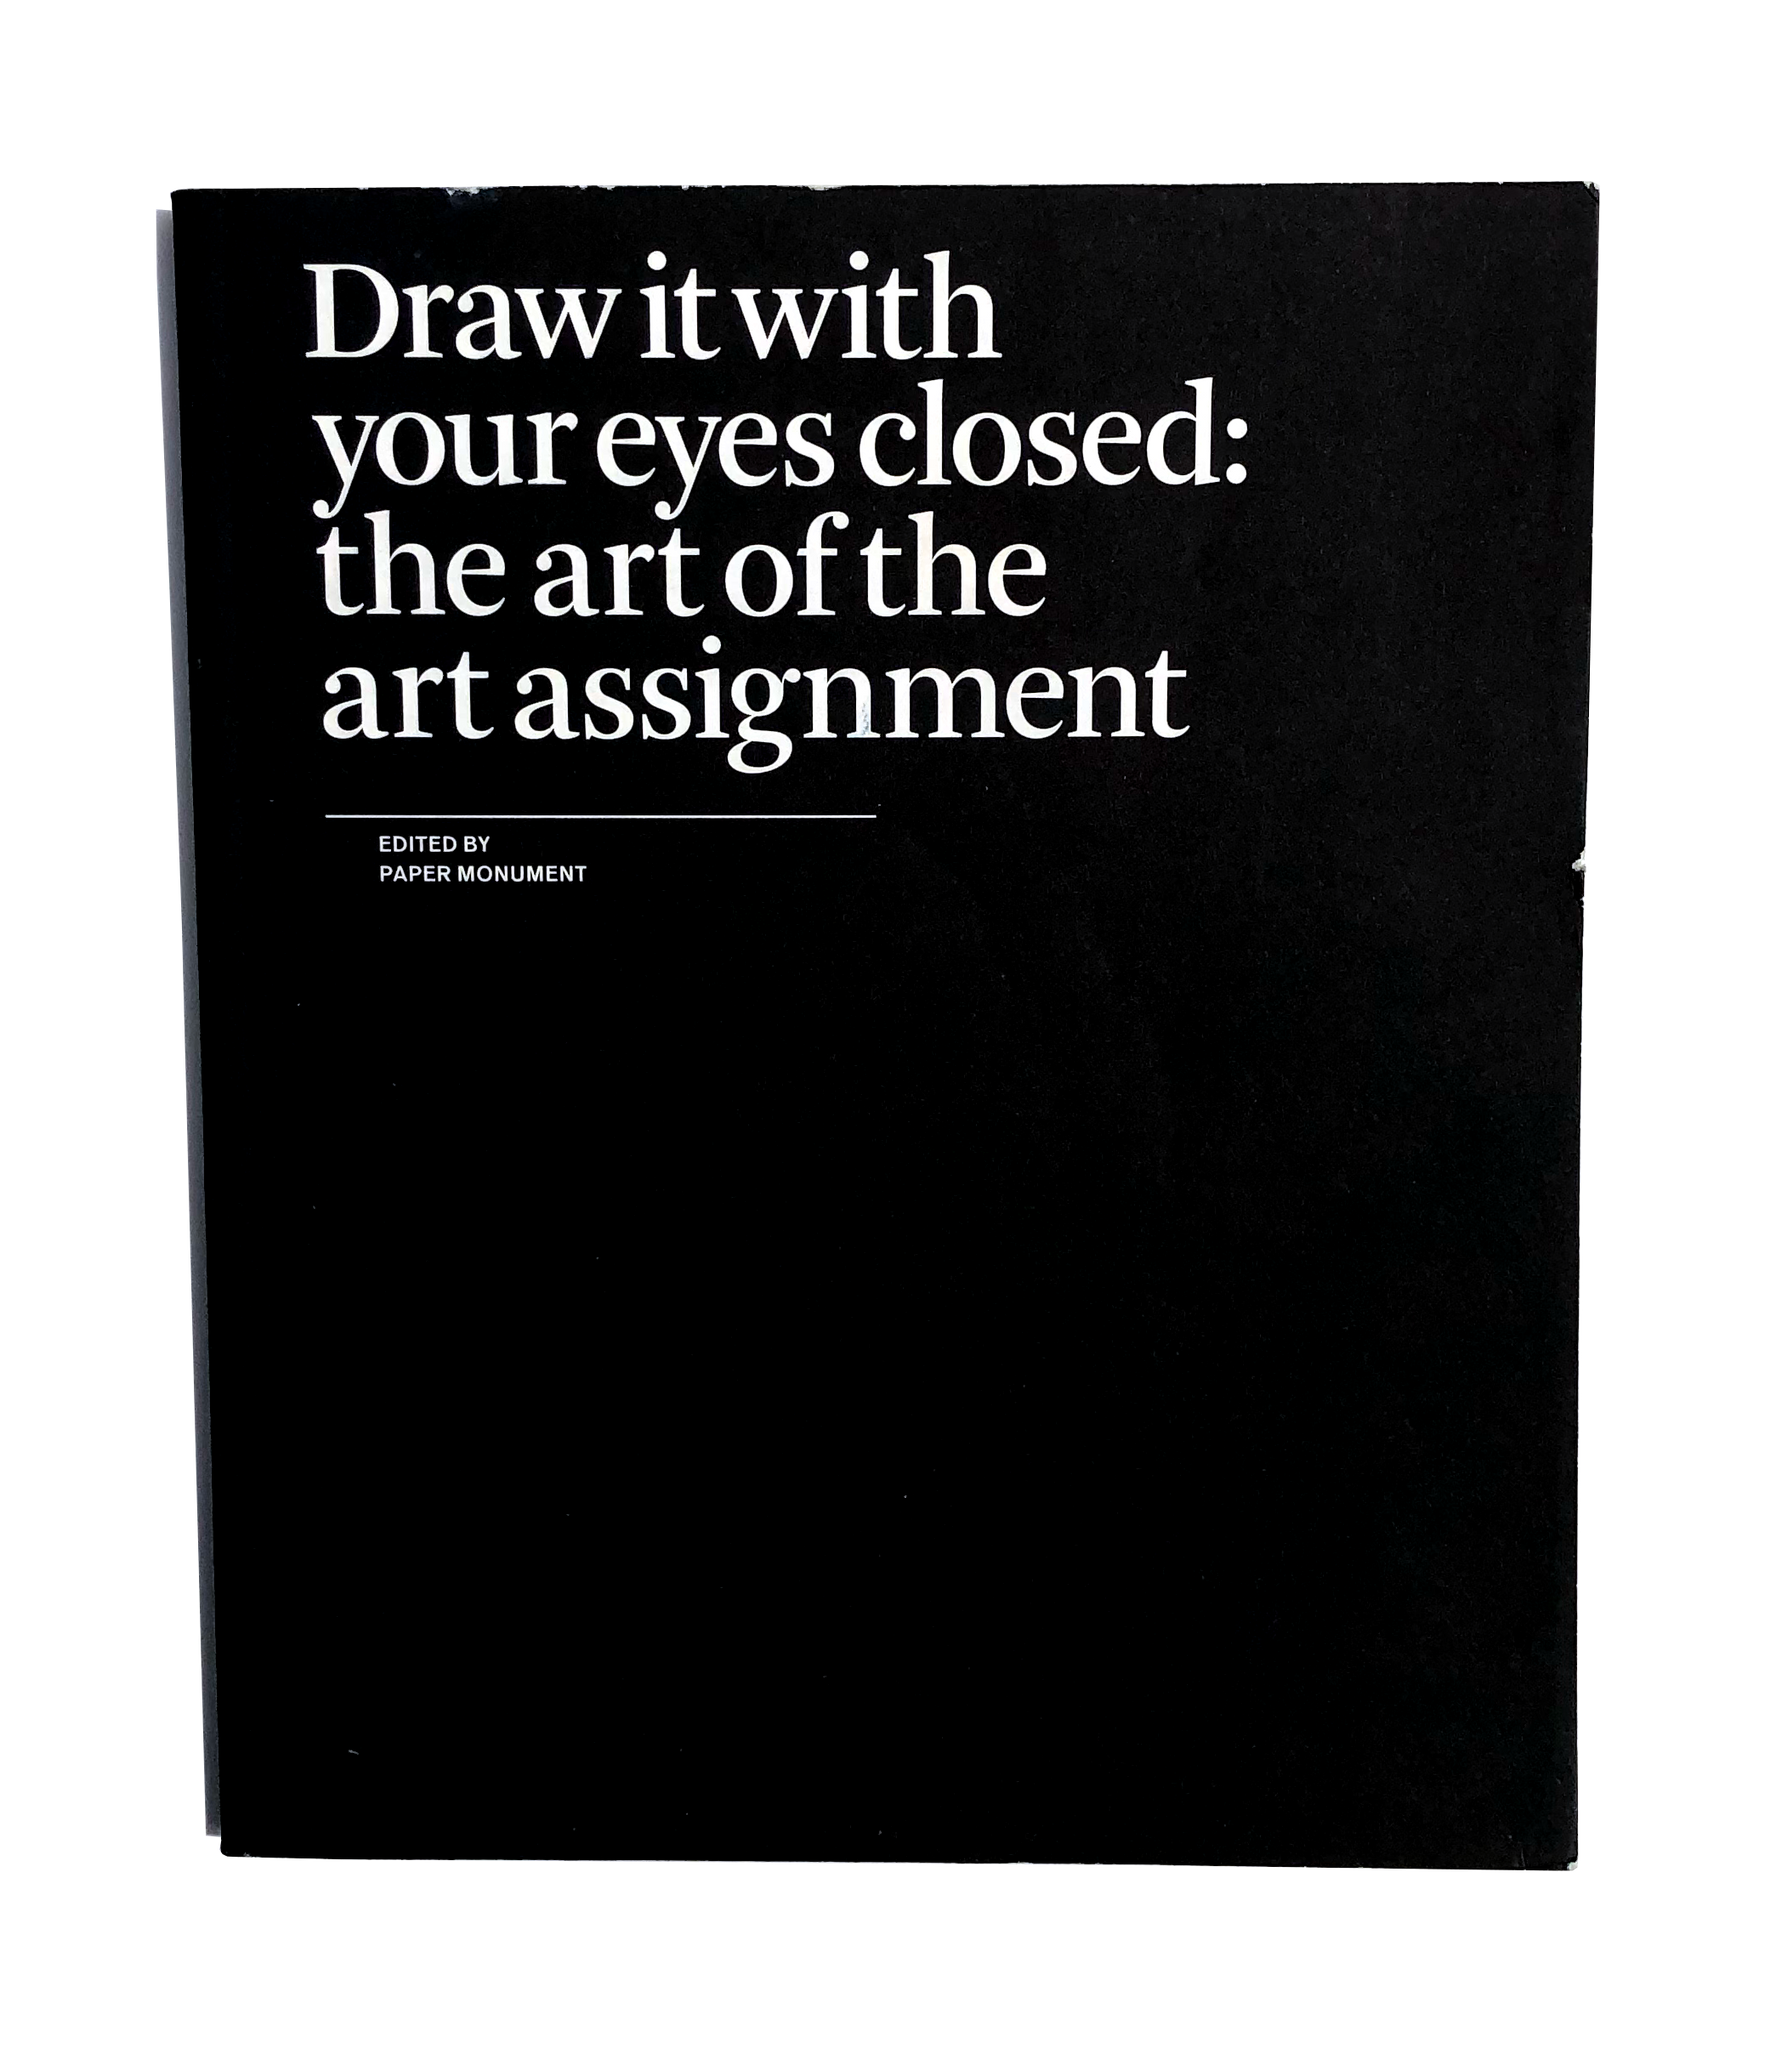 Draw It with Your Eyes Closed: The Art of the Art Assignment by Paper Monument and N+1